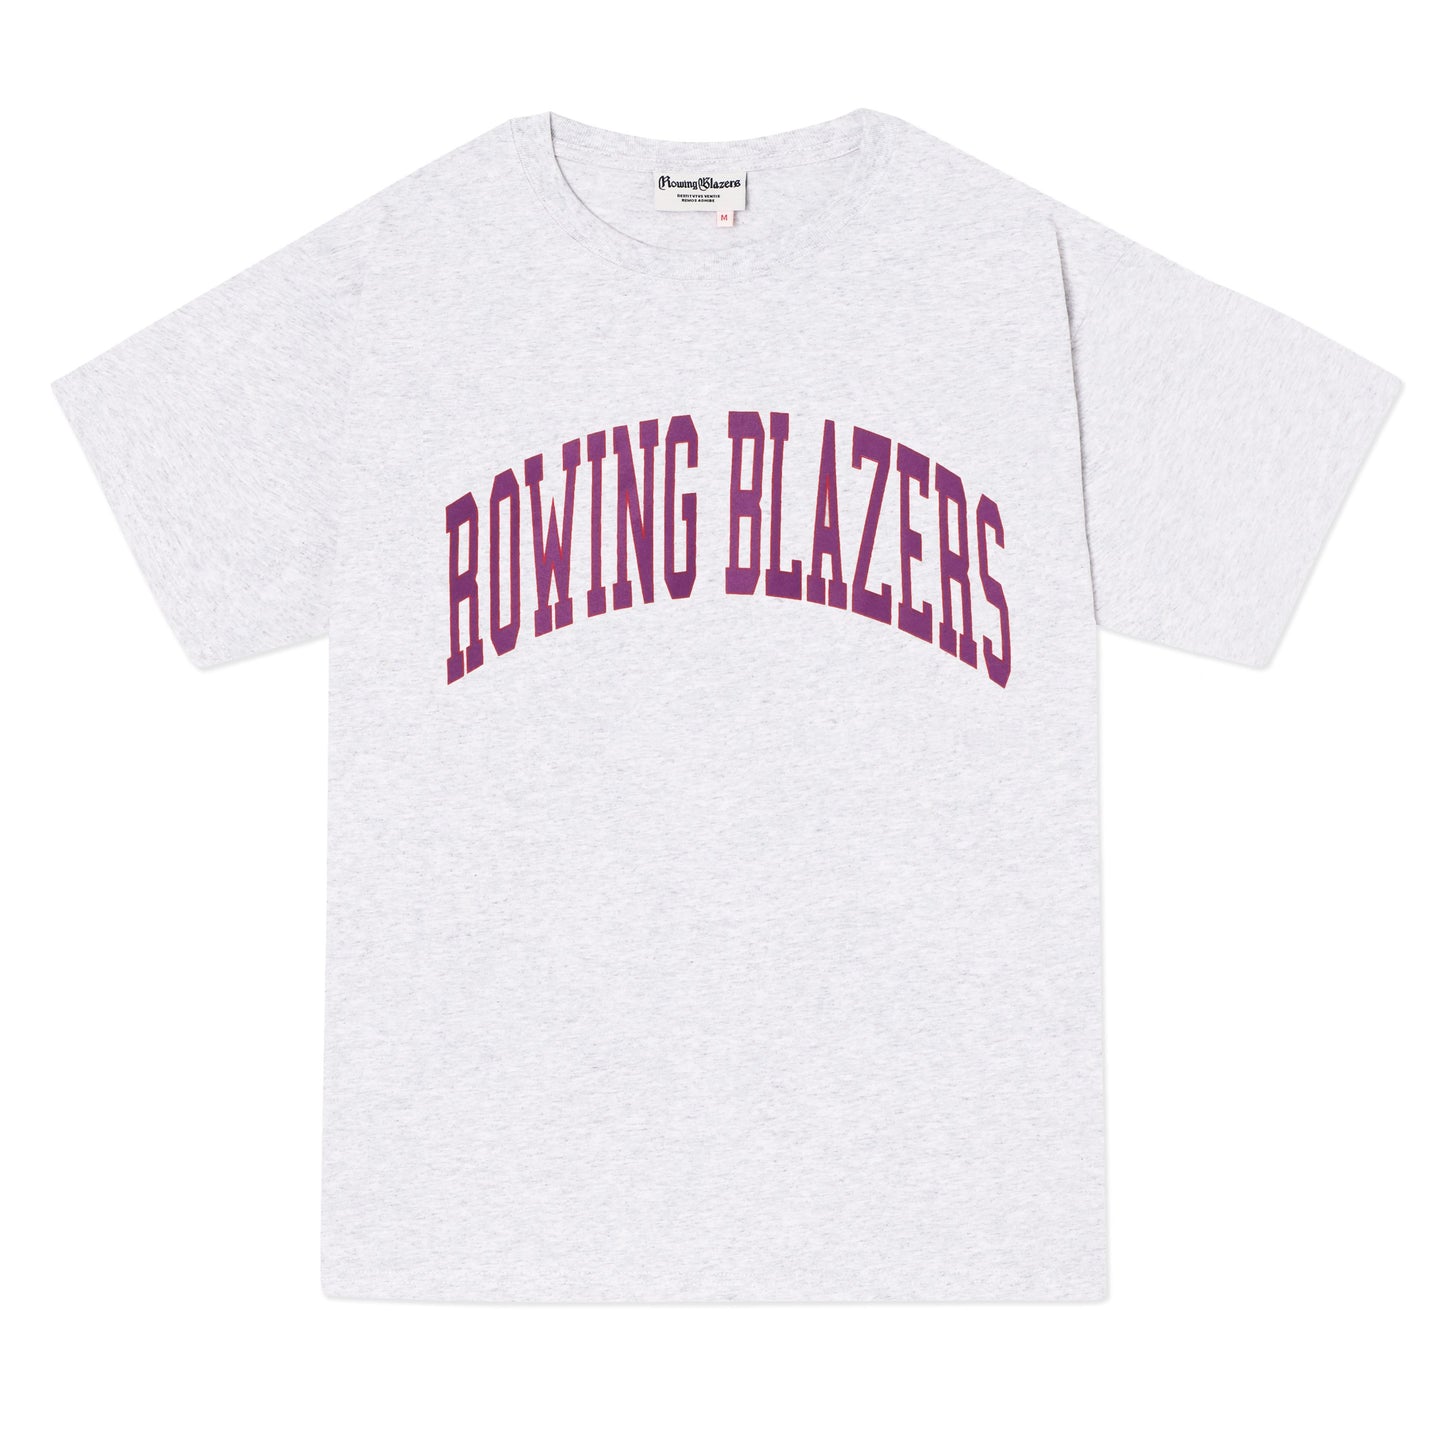 Classic light heather gray collegiate tee with "Rowing Blazers" across the front in purple.